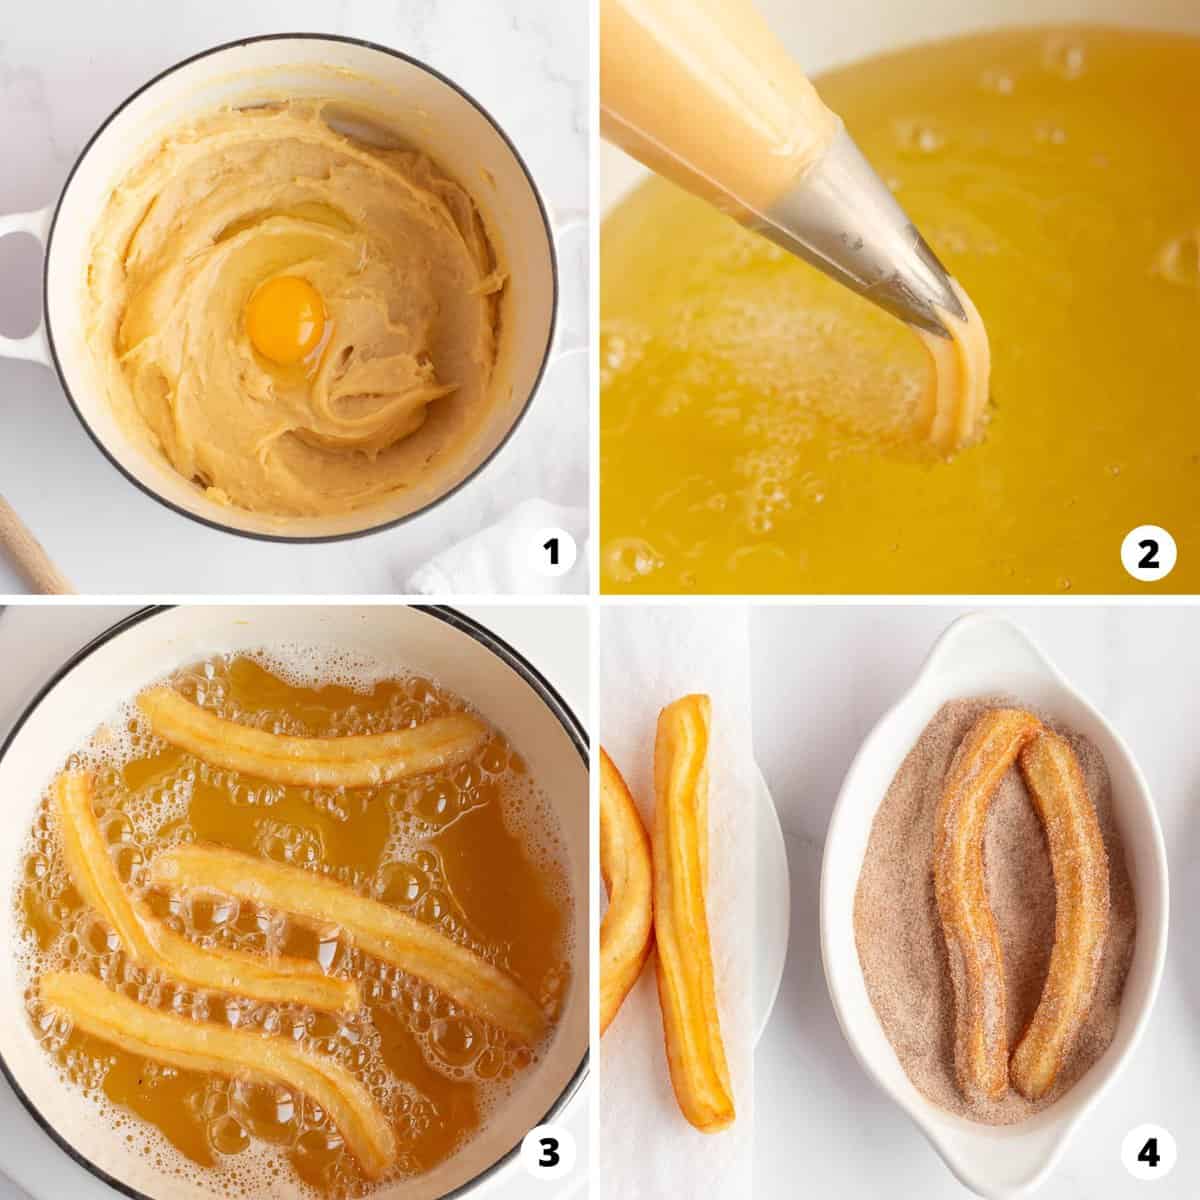 Showing how to make churros in a 4 step collage.